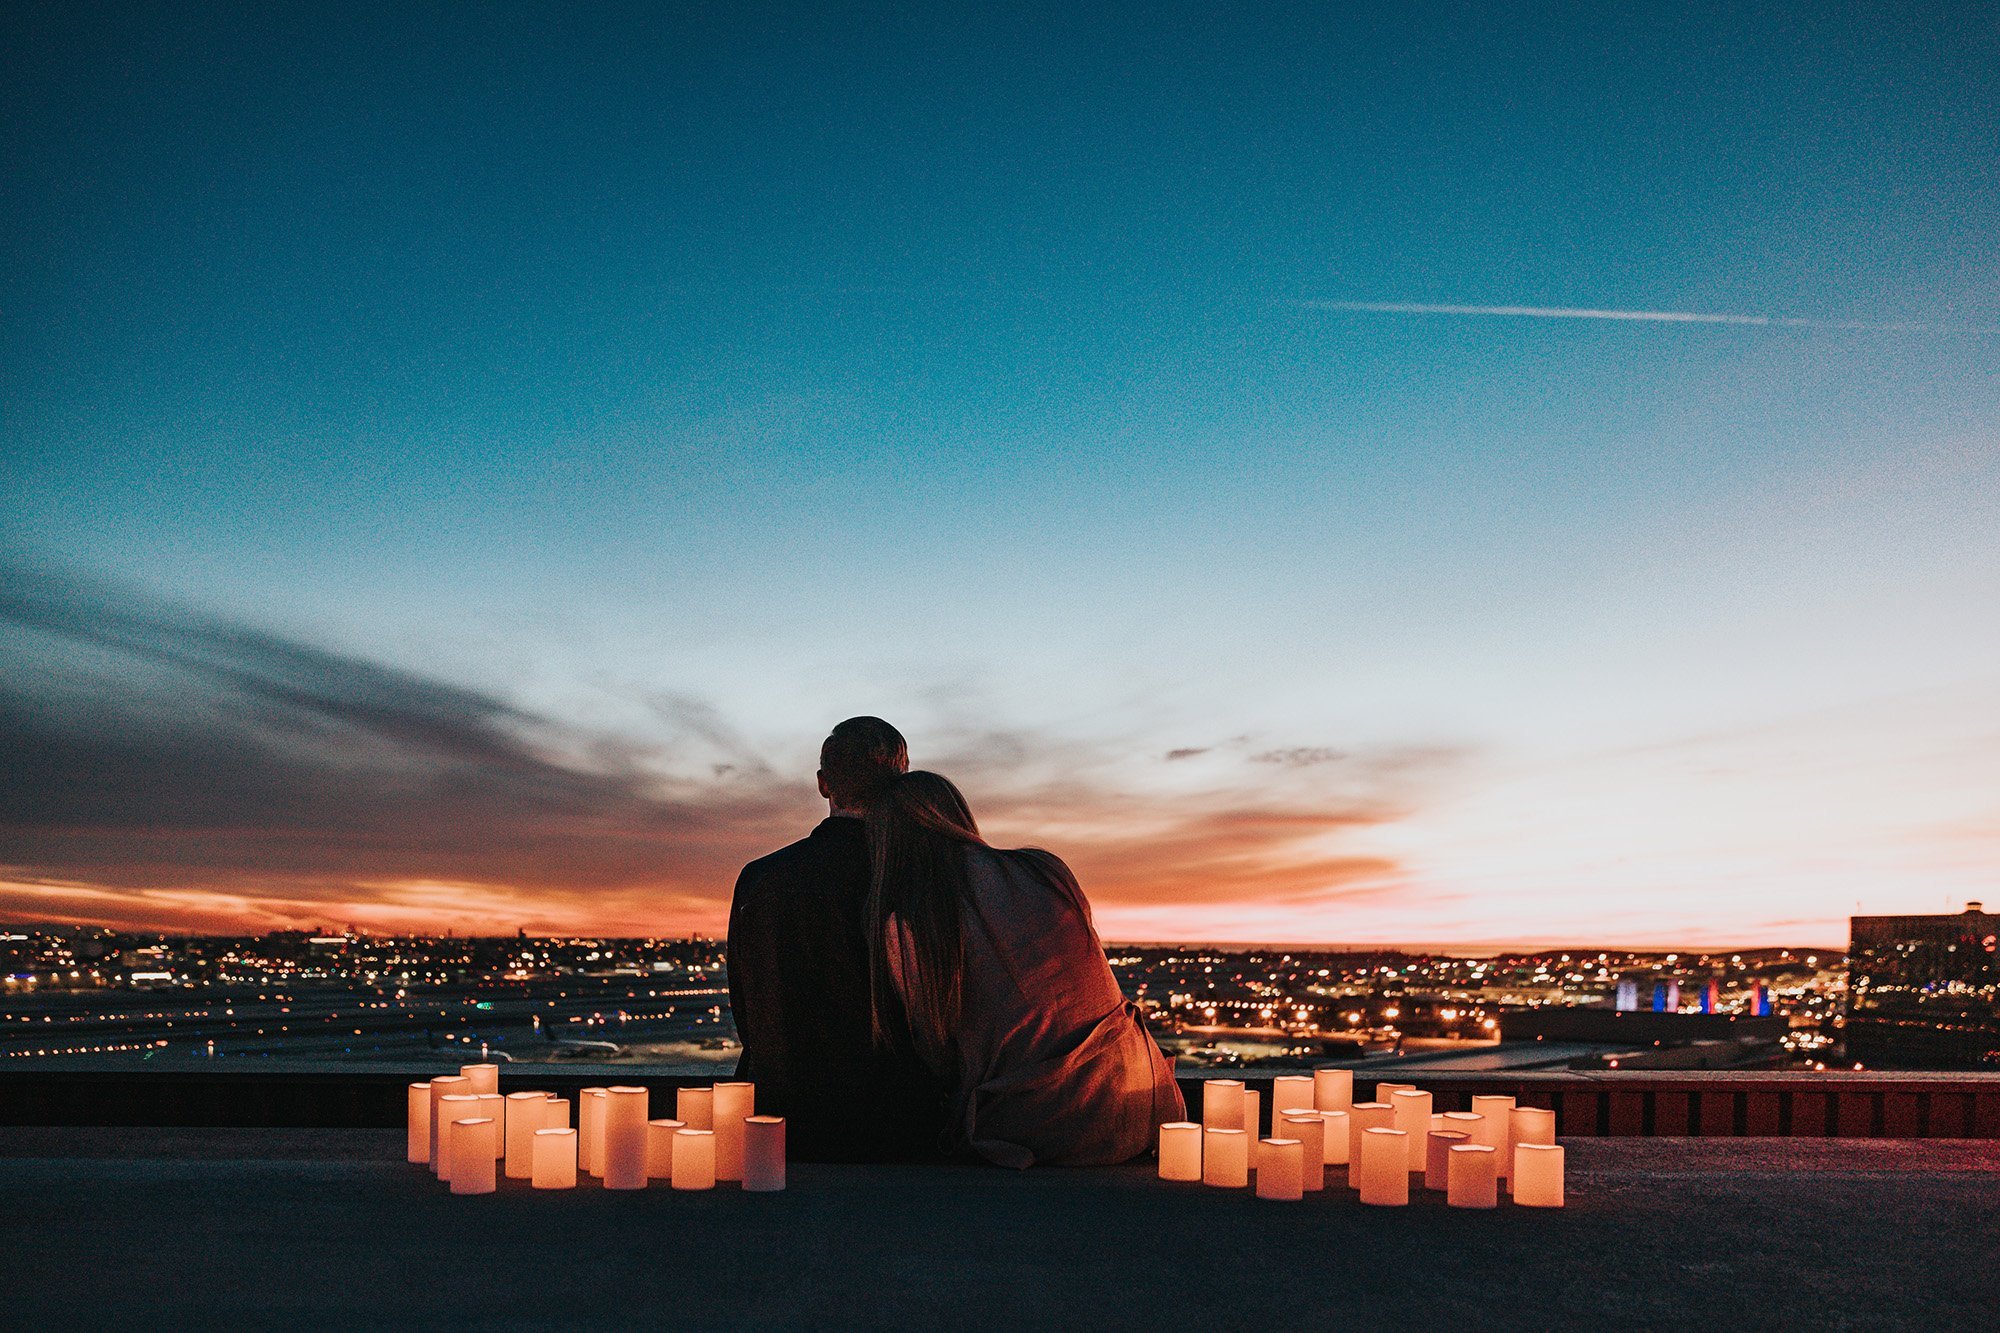 Man and woman sitting around candles watching the sunset.